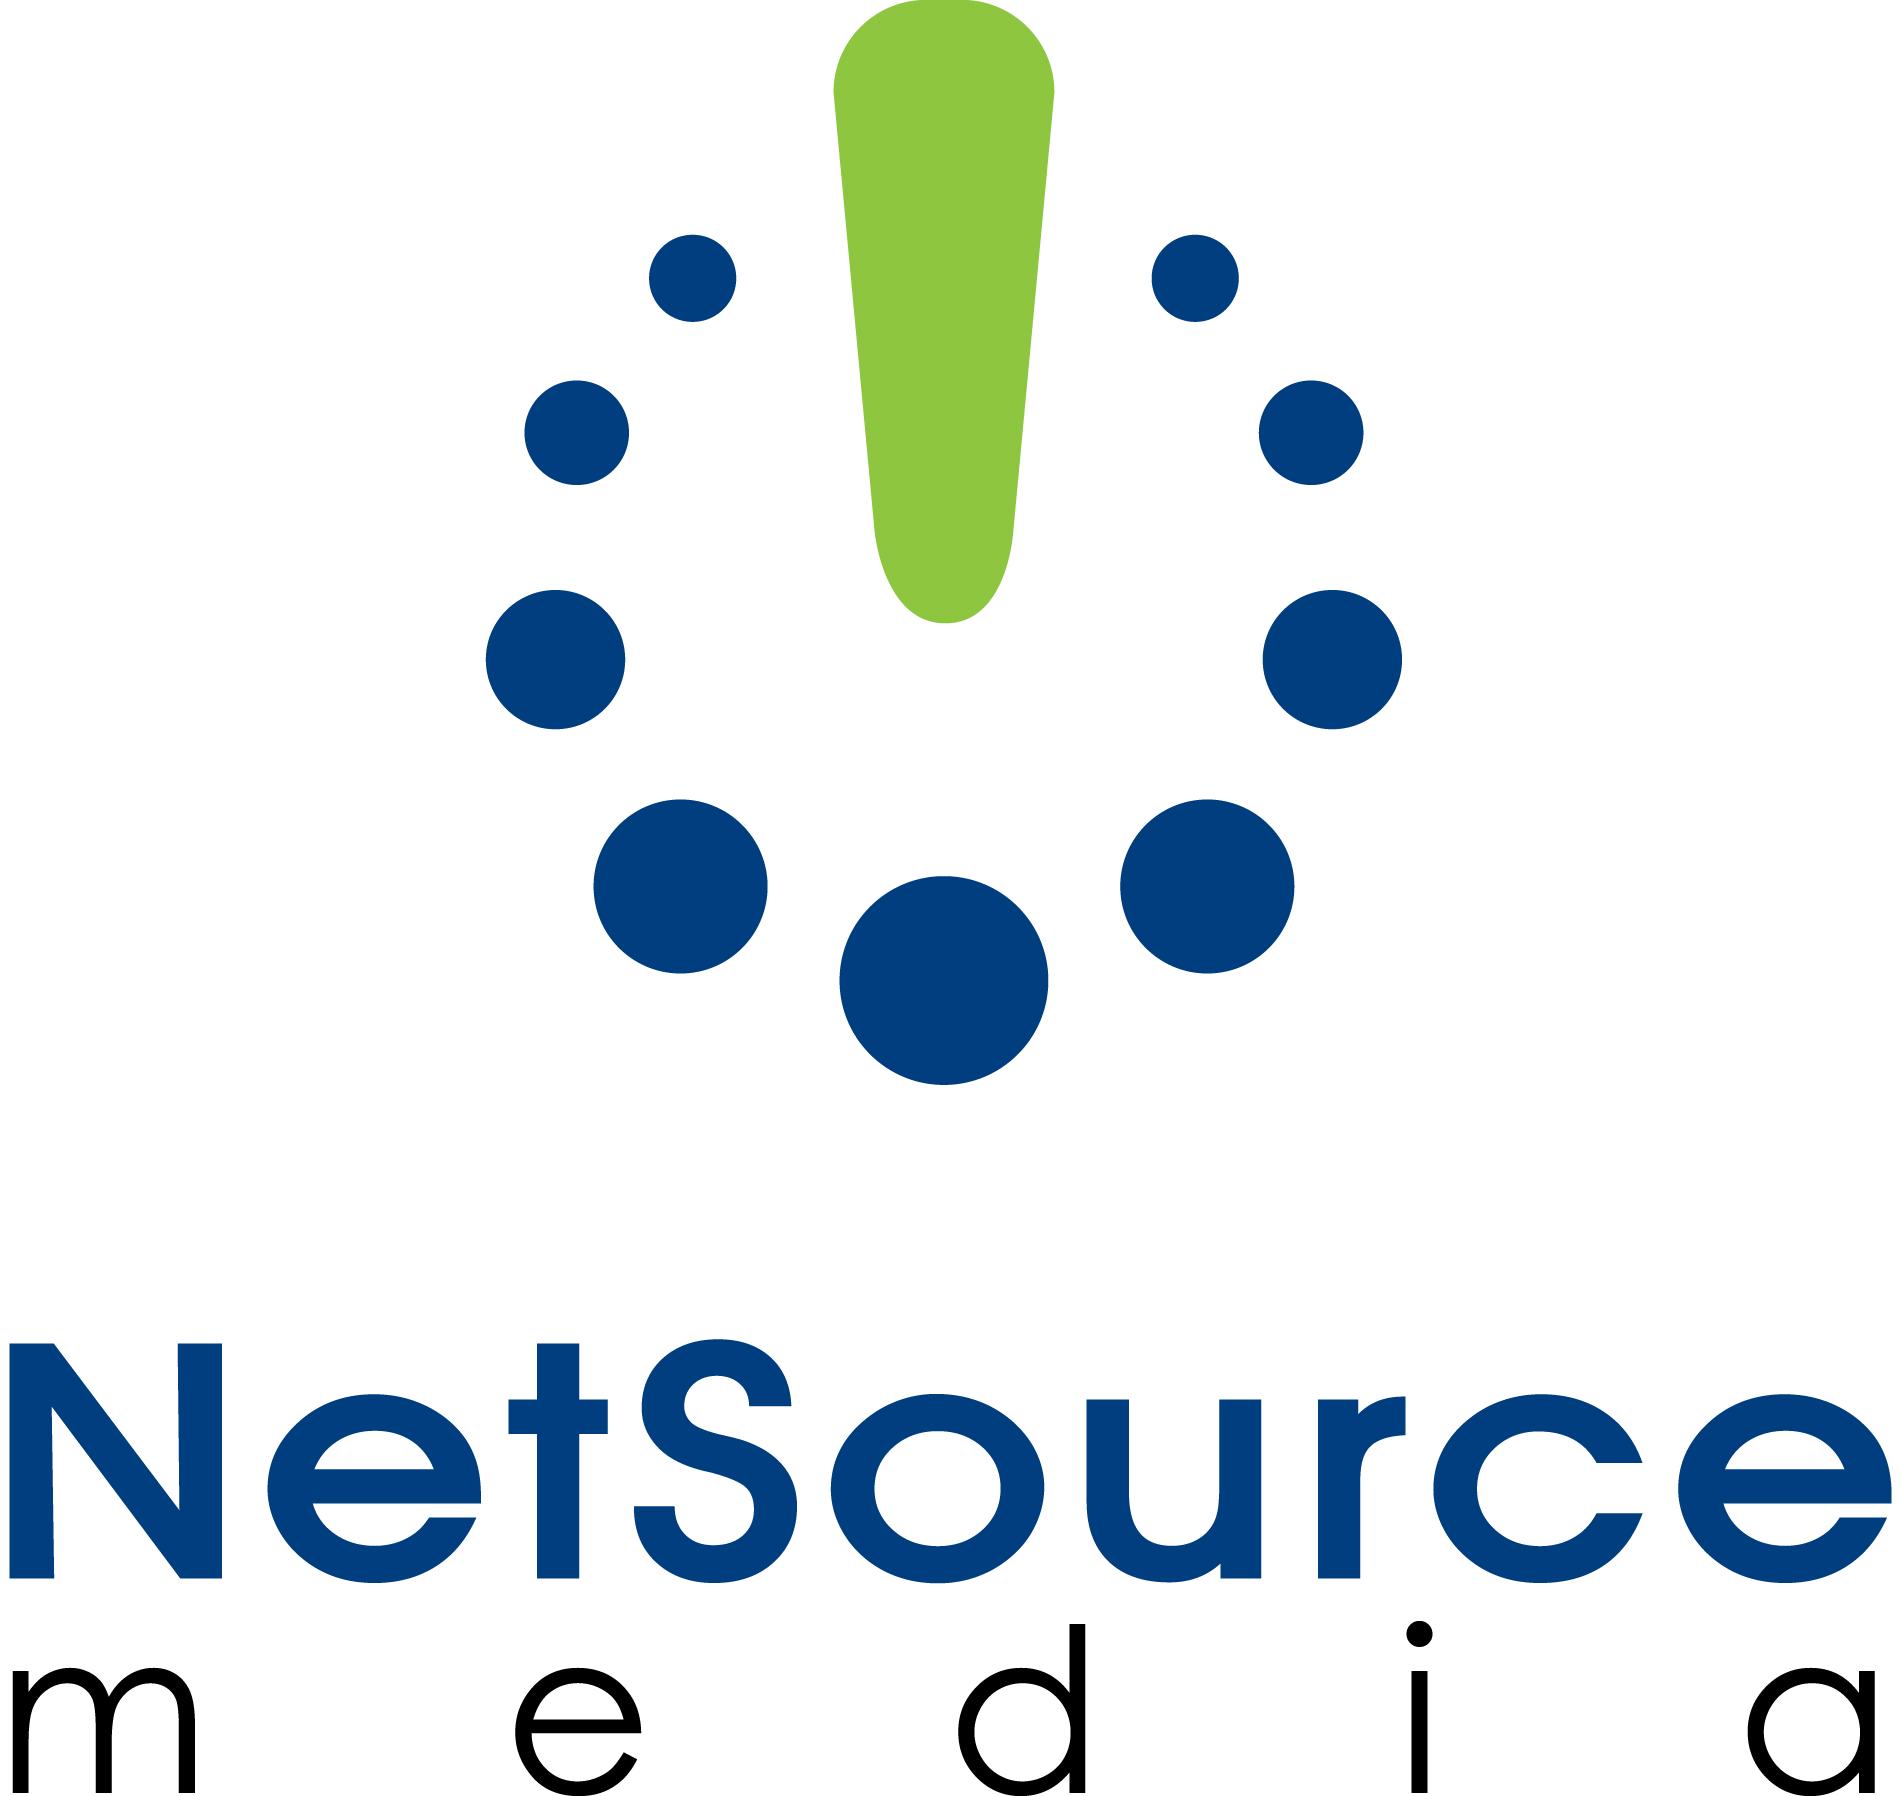 Netsource Media profile on Qualified.One